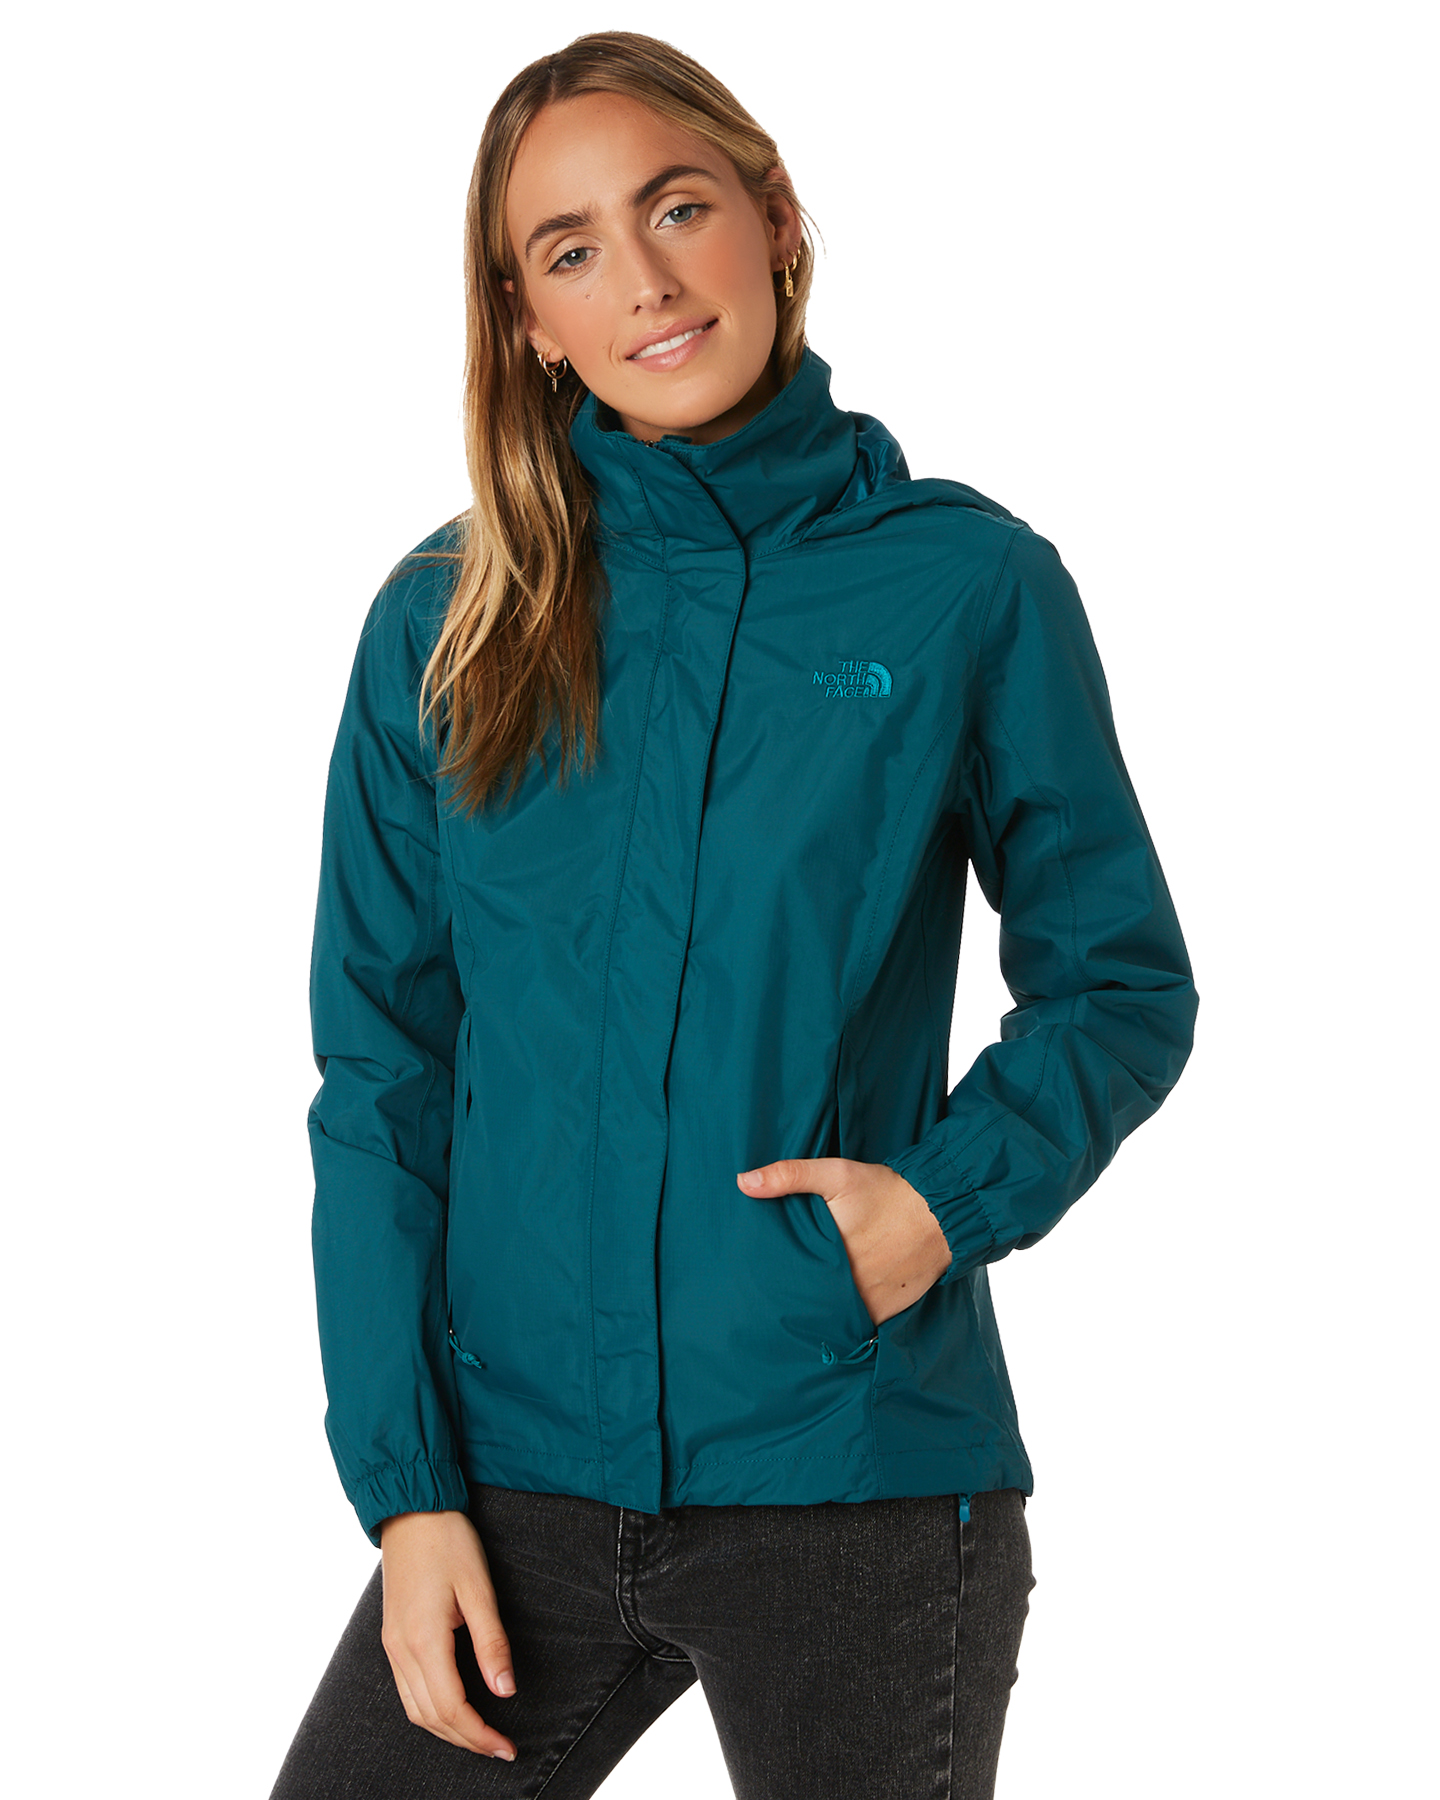 The North Face Womens Resolve 2 Jacket - Deep Teal Blue | SurfStitch